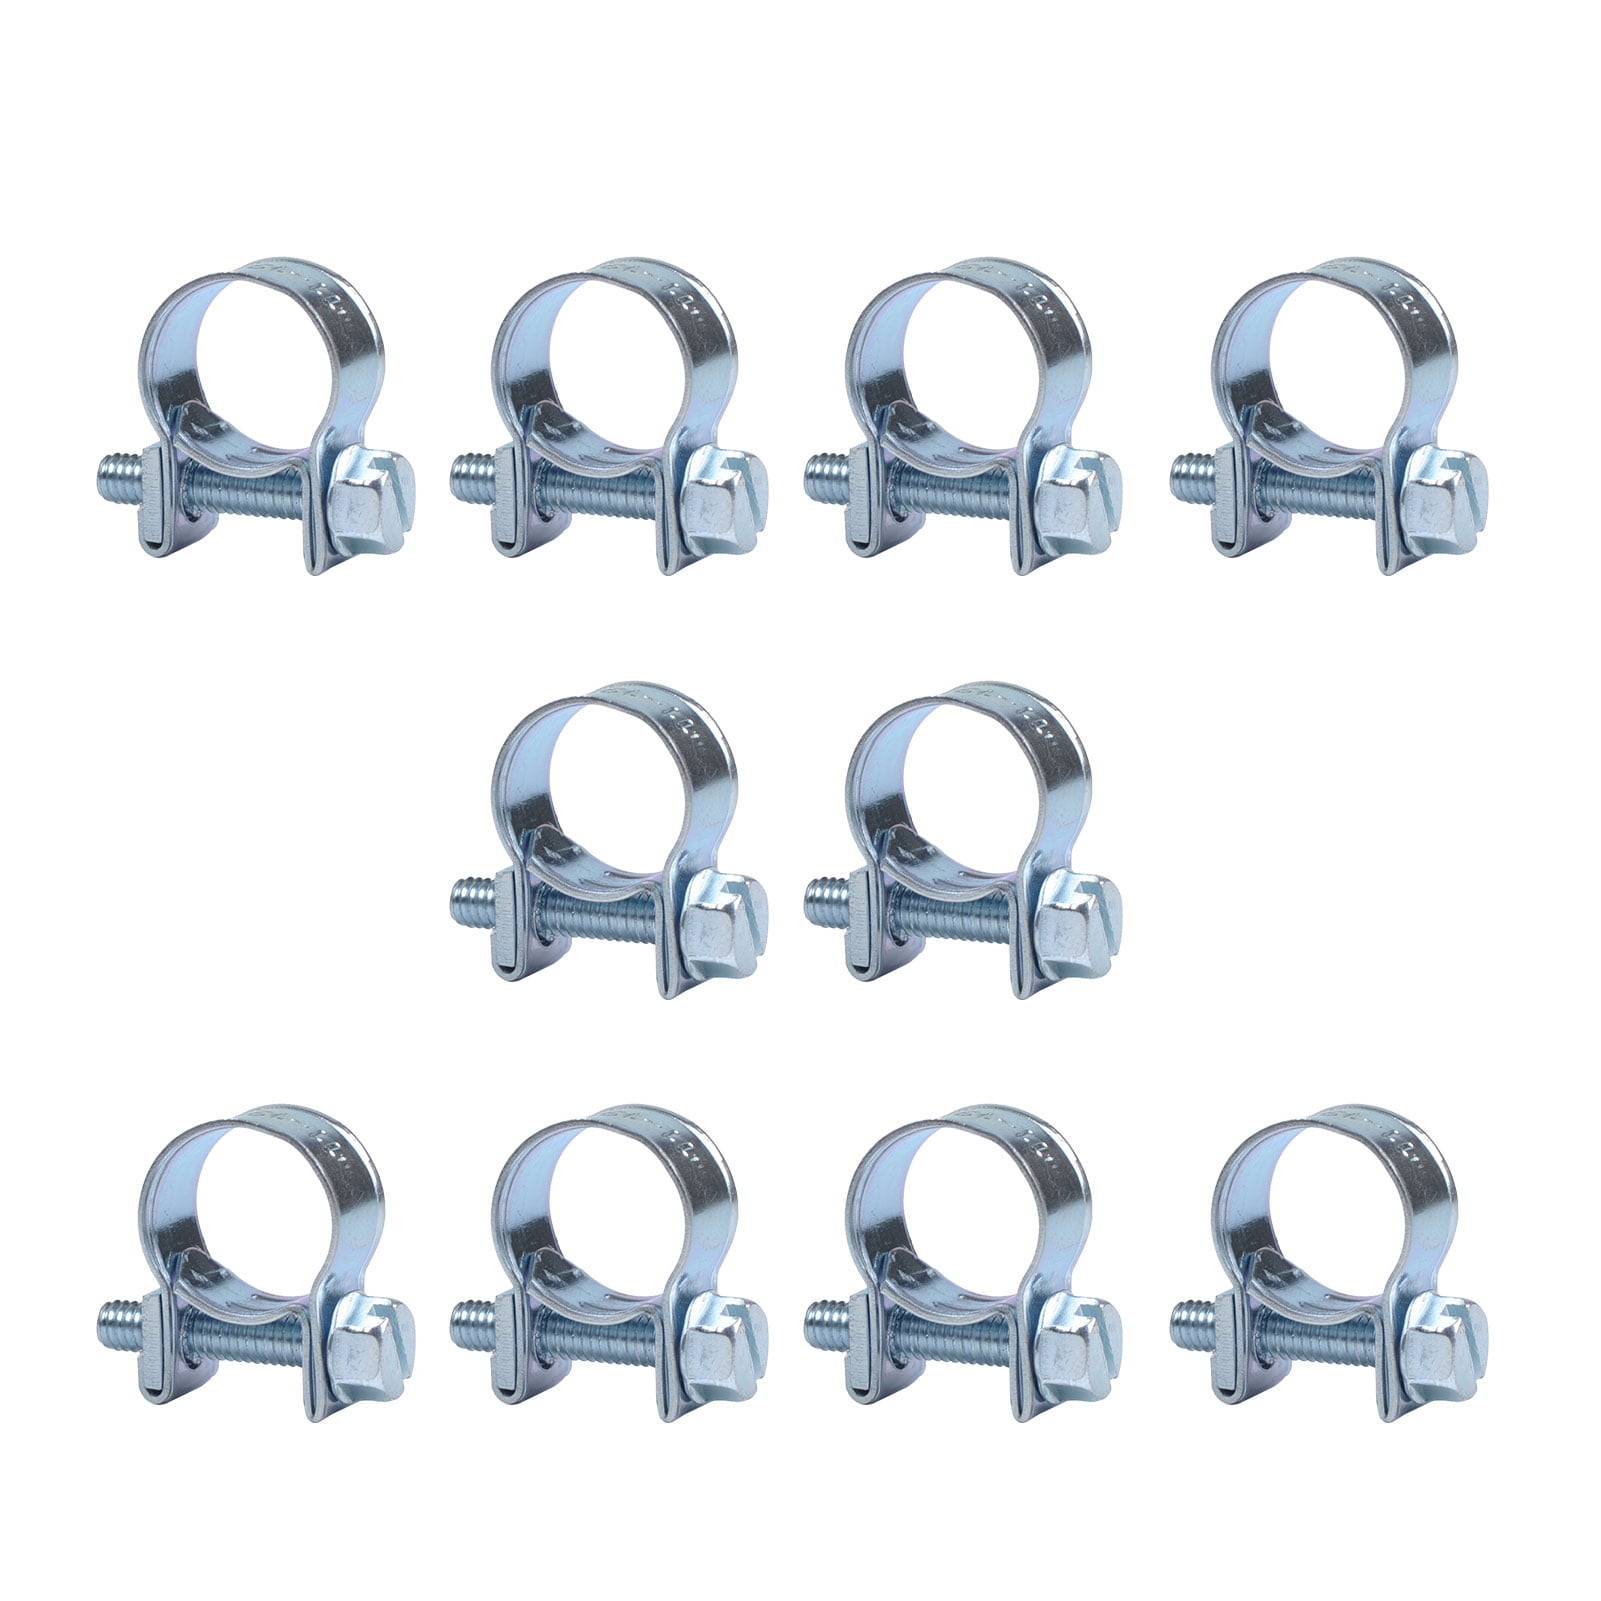 10pcs Double Ear Hose Clamps Fuel Pipe Water Hose Clamp Carbon Steel Accessories 